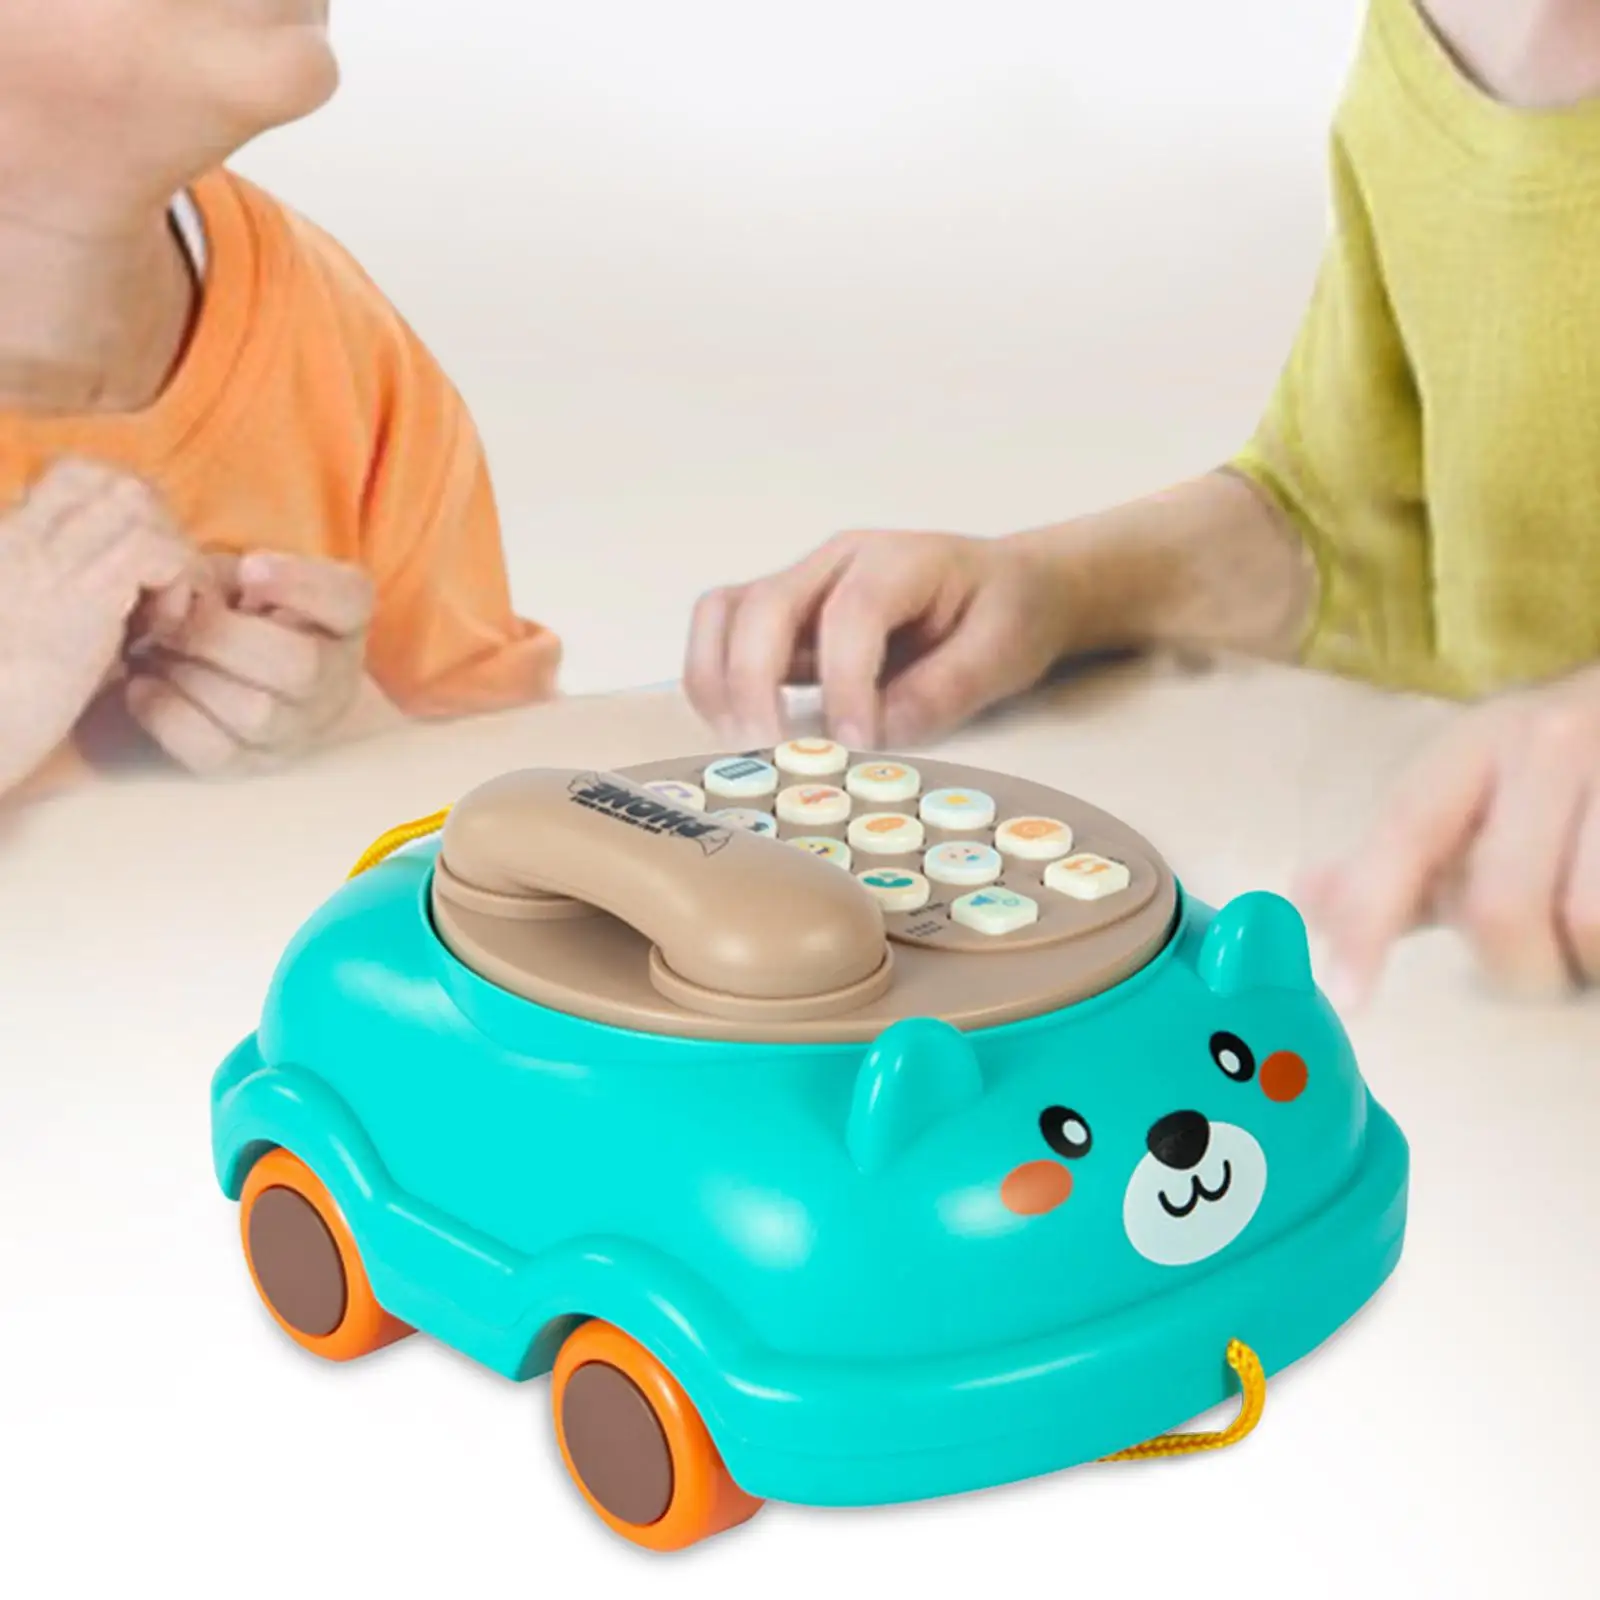 Kid Phone Cognitive Development Games for 3 Years Old Creative Gift Boy